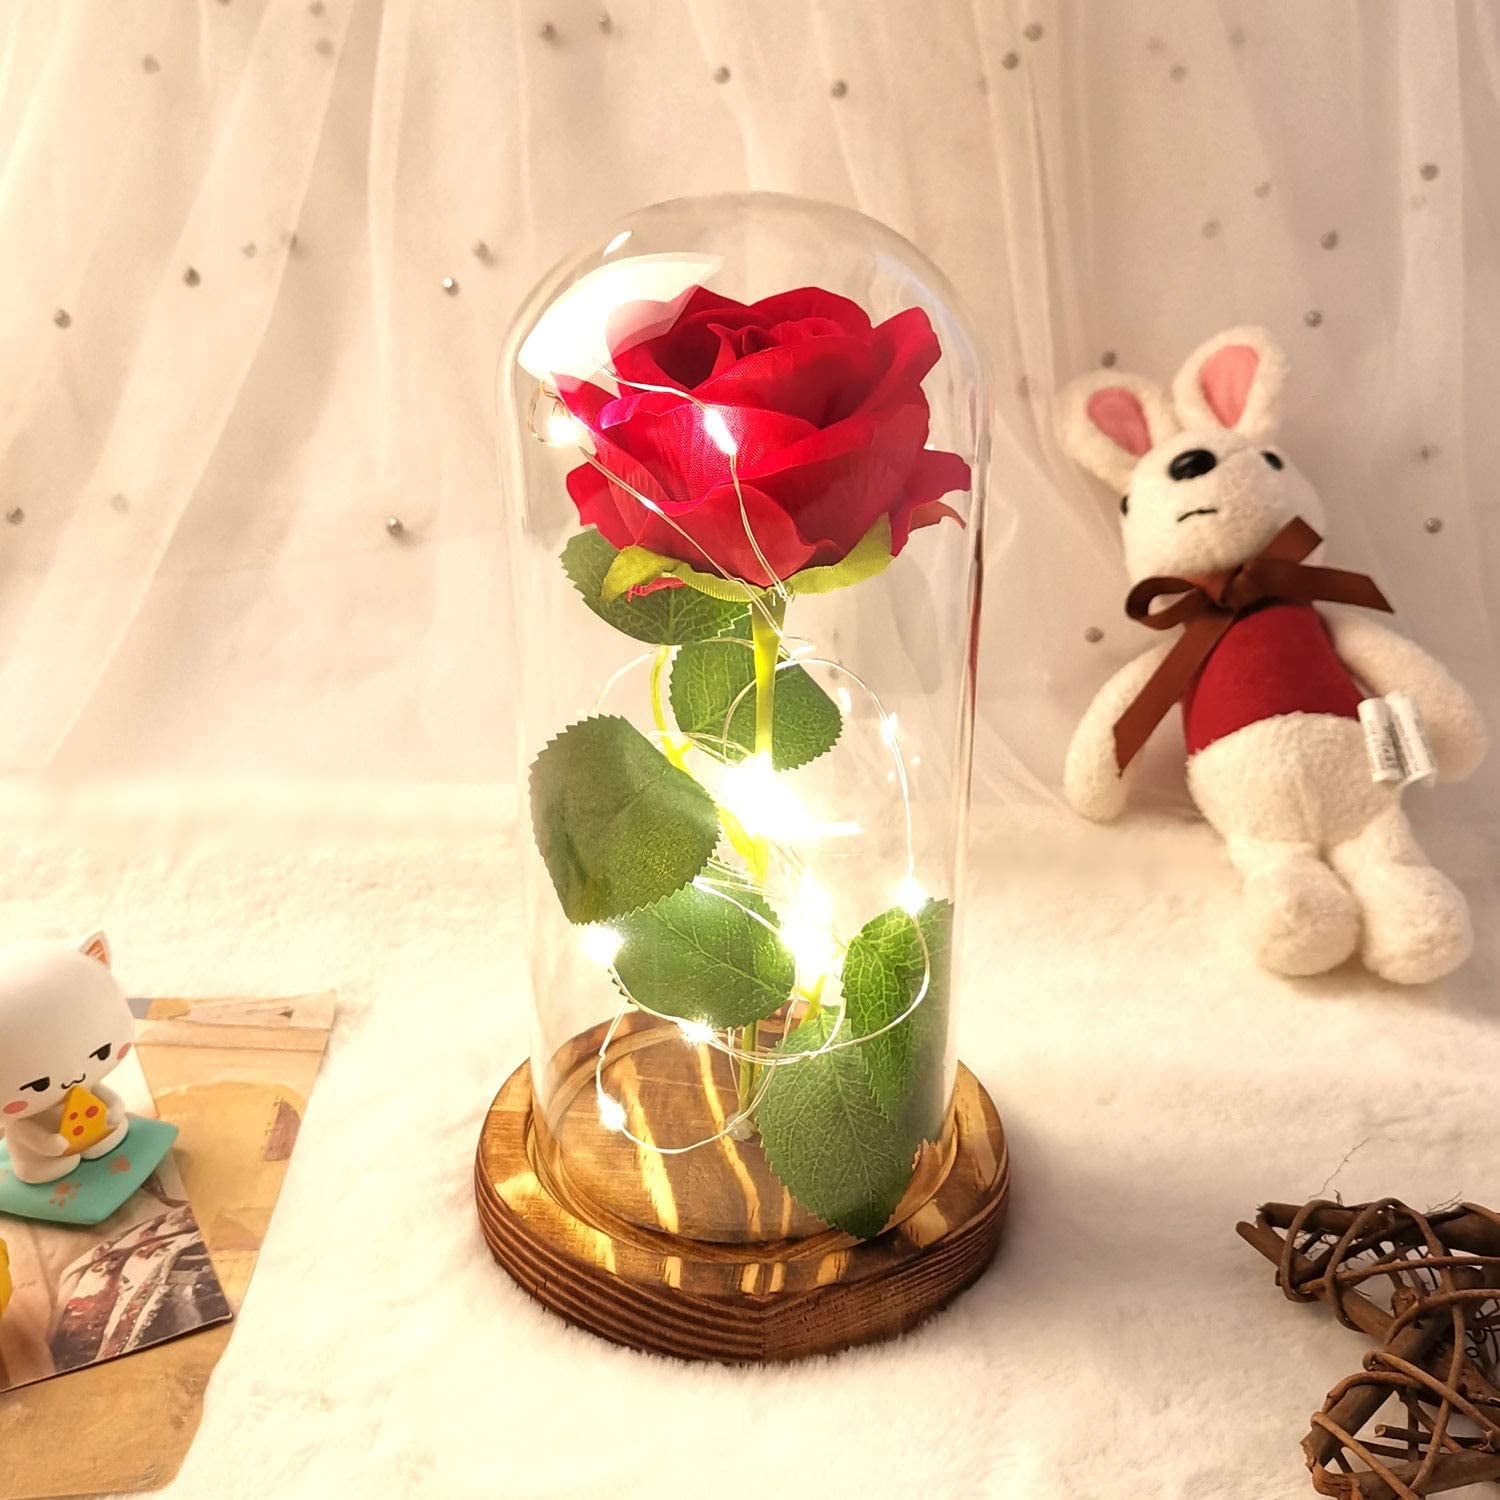 Glass Roses for Romantic Night,Forever Perfect Rose Flower Decoration for Mother's Day Valentines Day Wedding Christmas Thanksgiving Gift Beauty and The Beast Rose Christmas Gifts for Mom for Birthday Colorful light